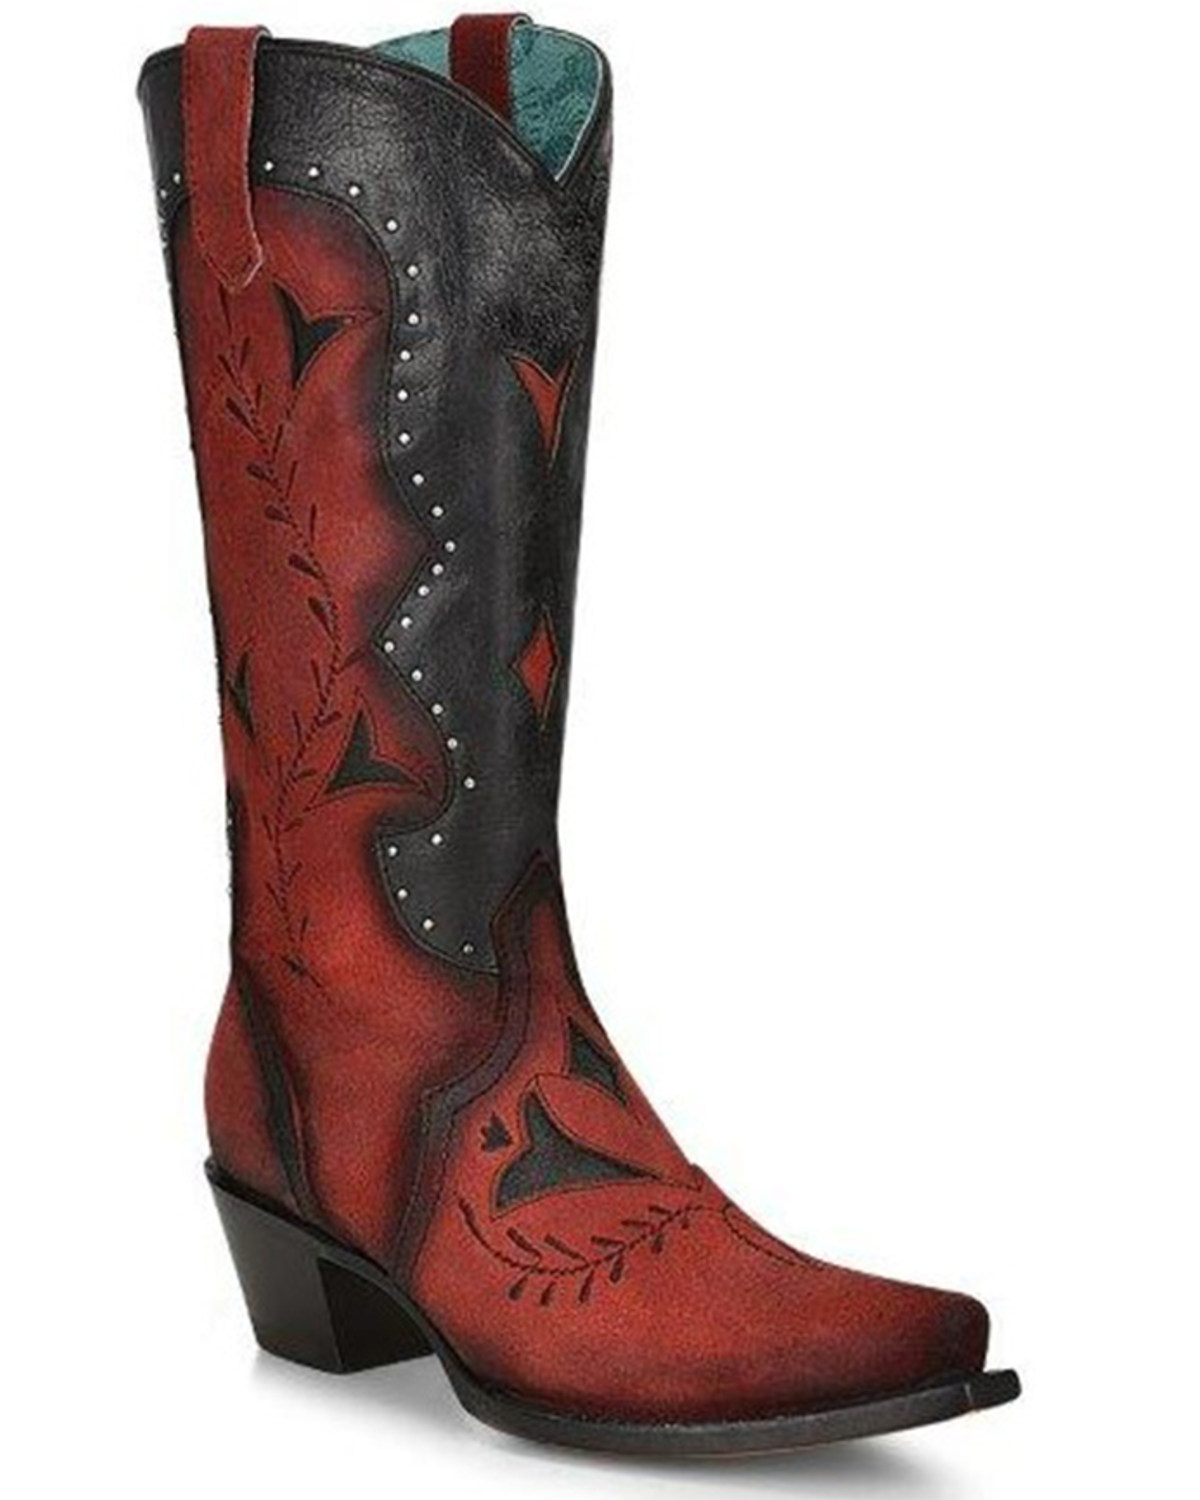 Corral Women's Studded Western Boots - Snip Toe